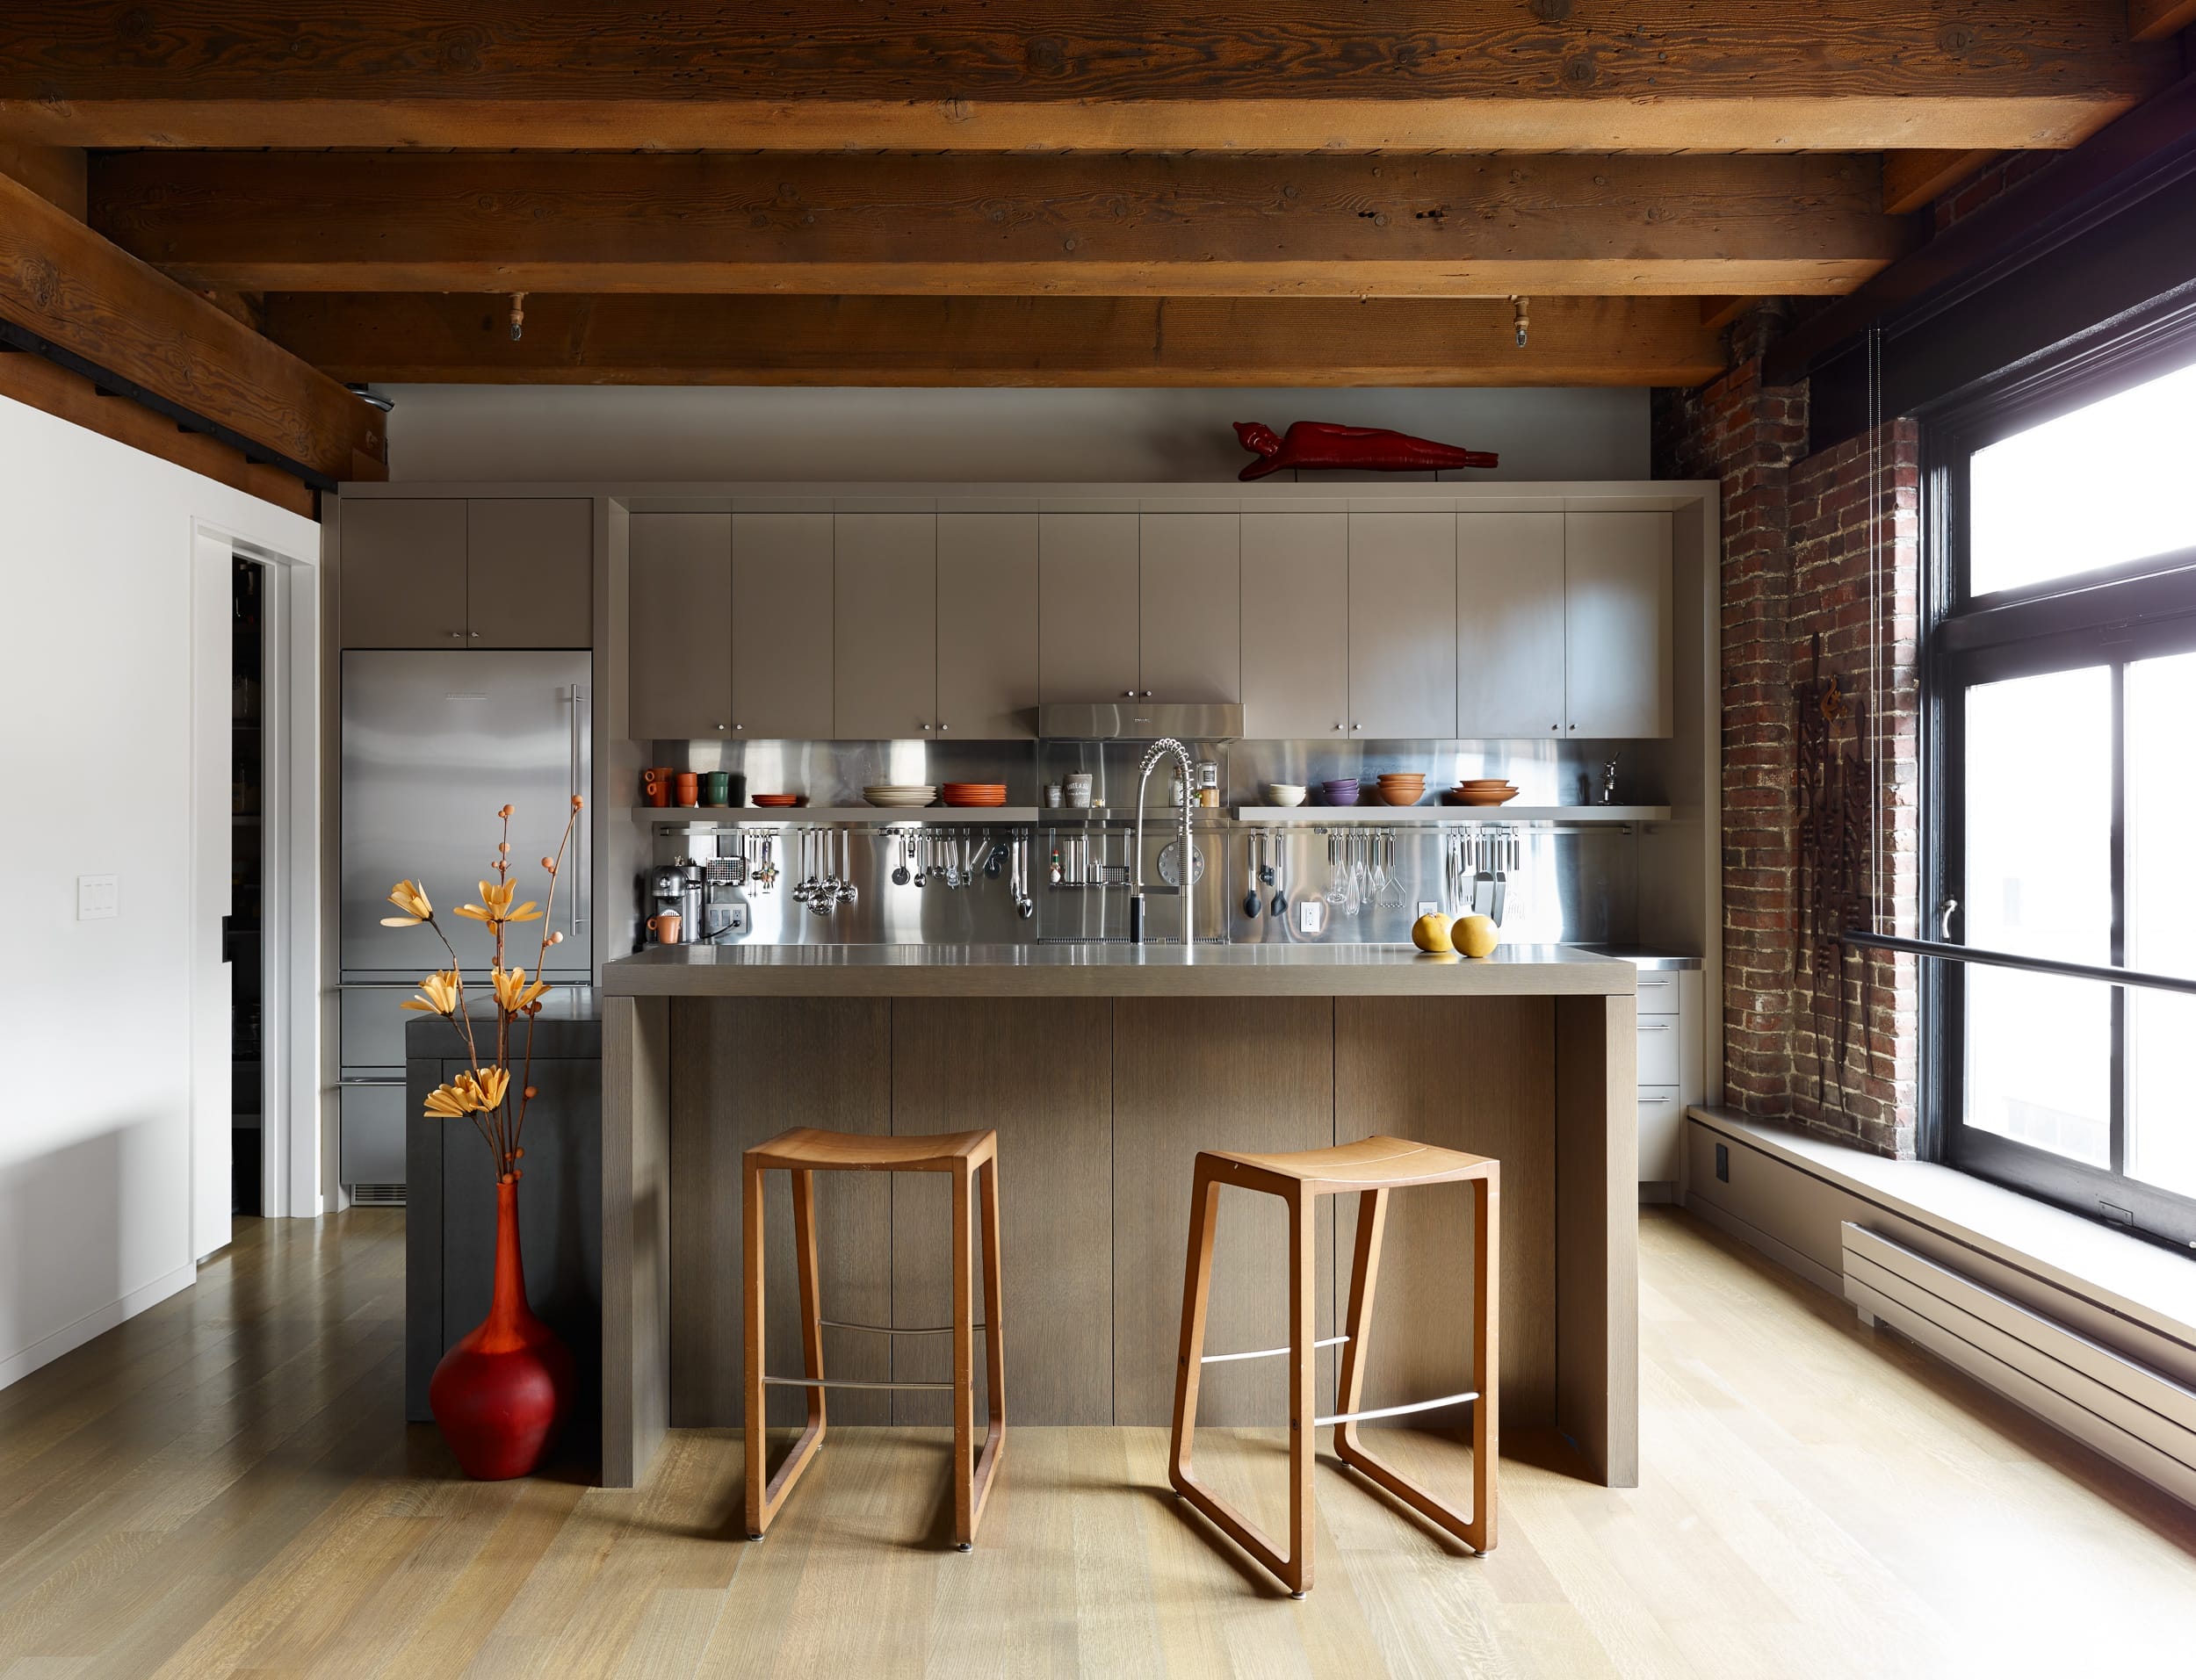 A kitchen with wooden beams and stools.